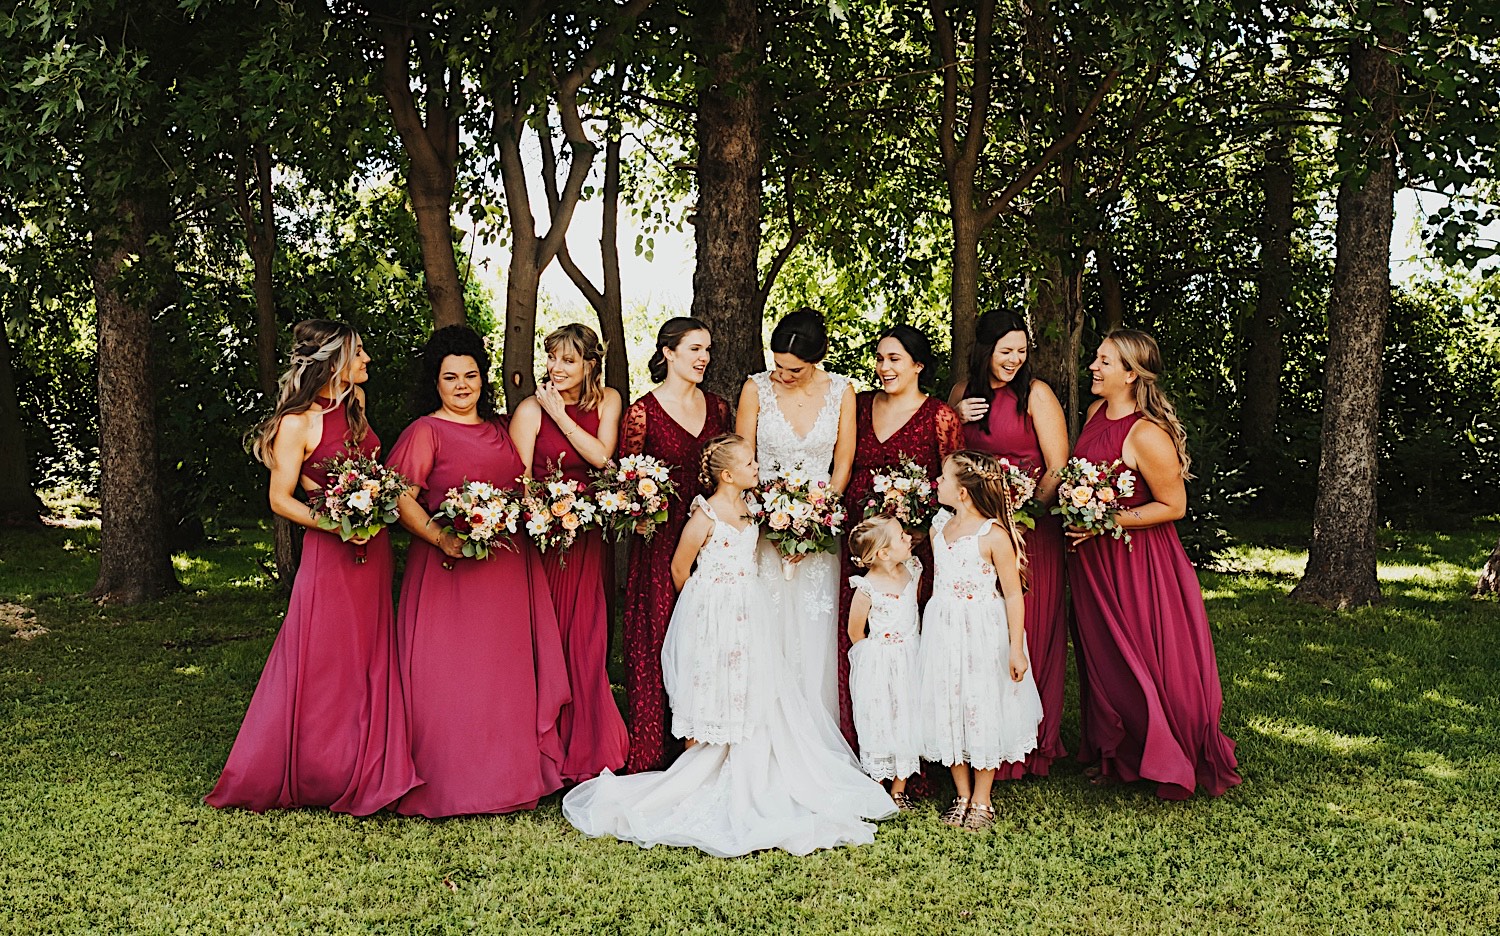 A bride mingles with her bridesmaids and flower girls while standing outside in front of a row of trees at the wedding venue Legacy Hill Farm